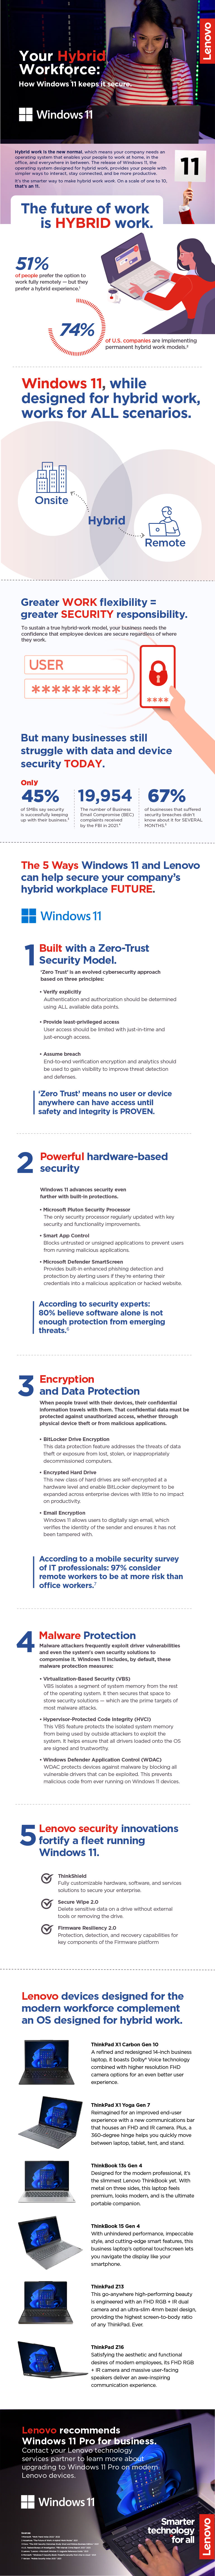 Your Hybrid Workforce: How Windows 11 Keeps It Secure infographic